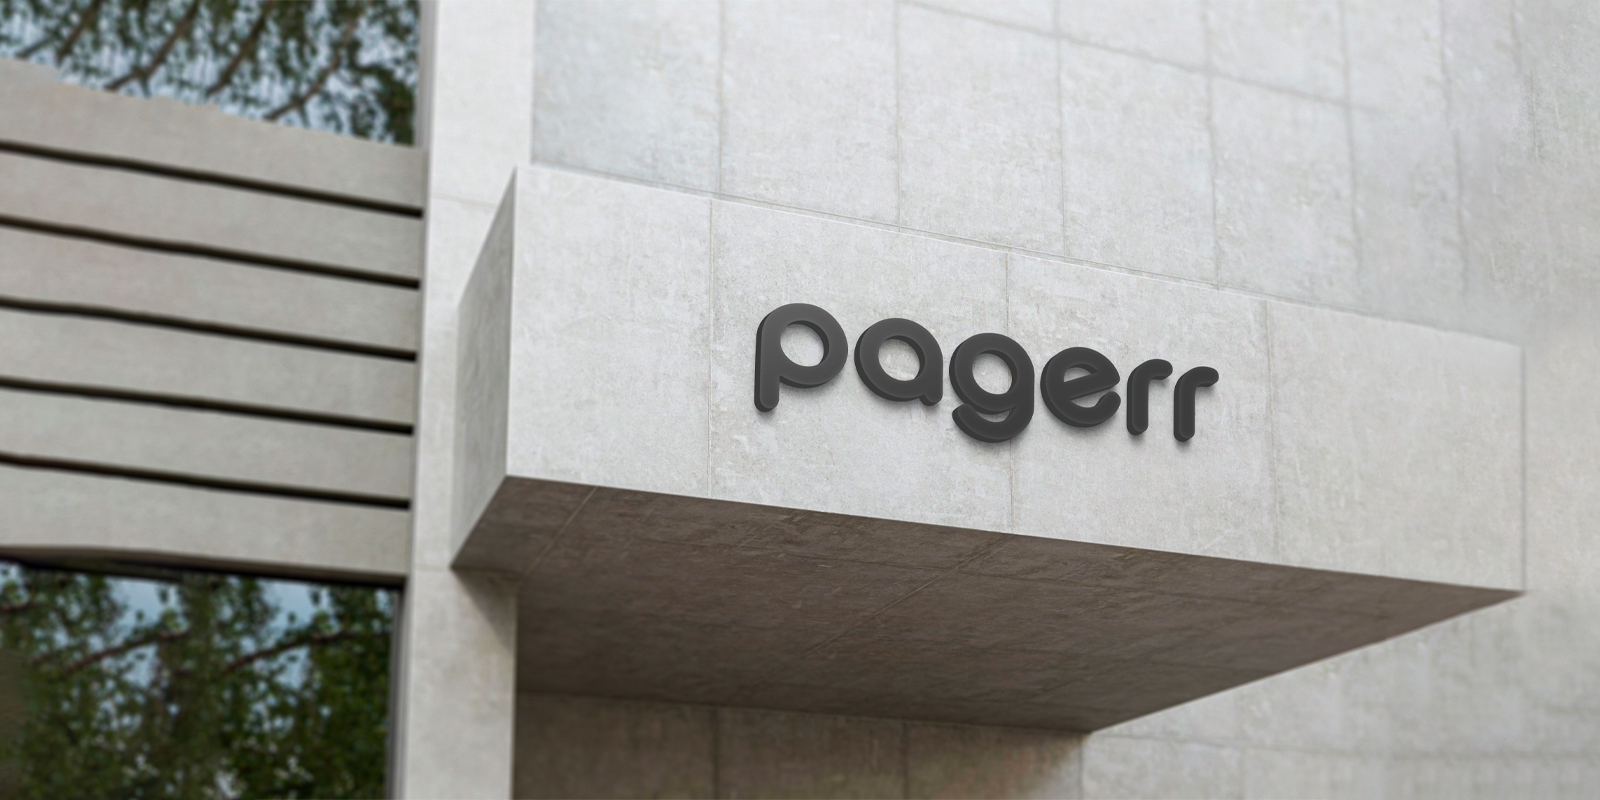 Logo signs in Newcastle - Print with Pagerr